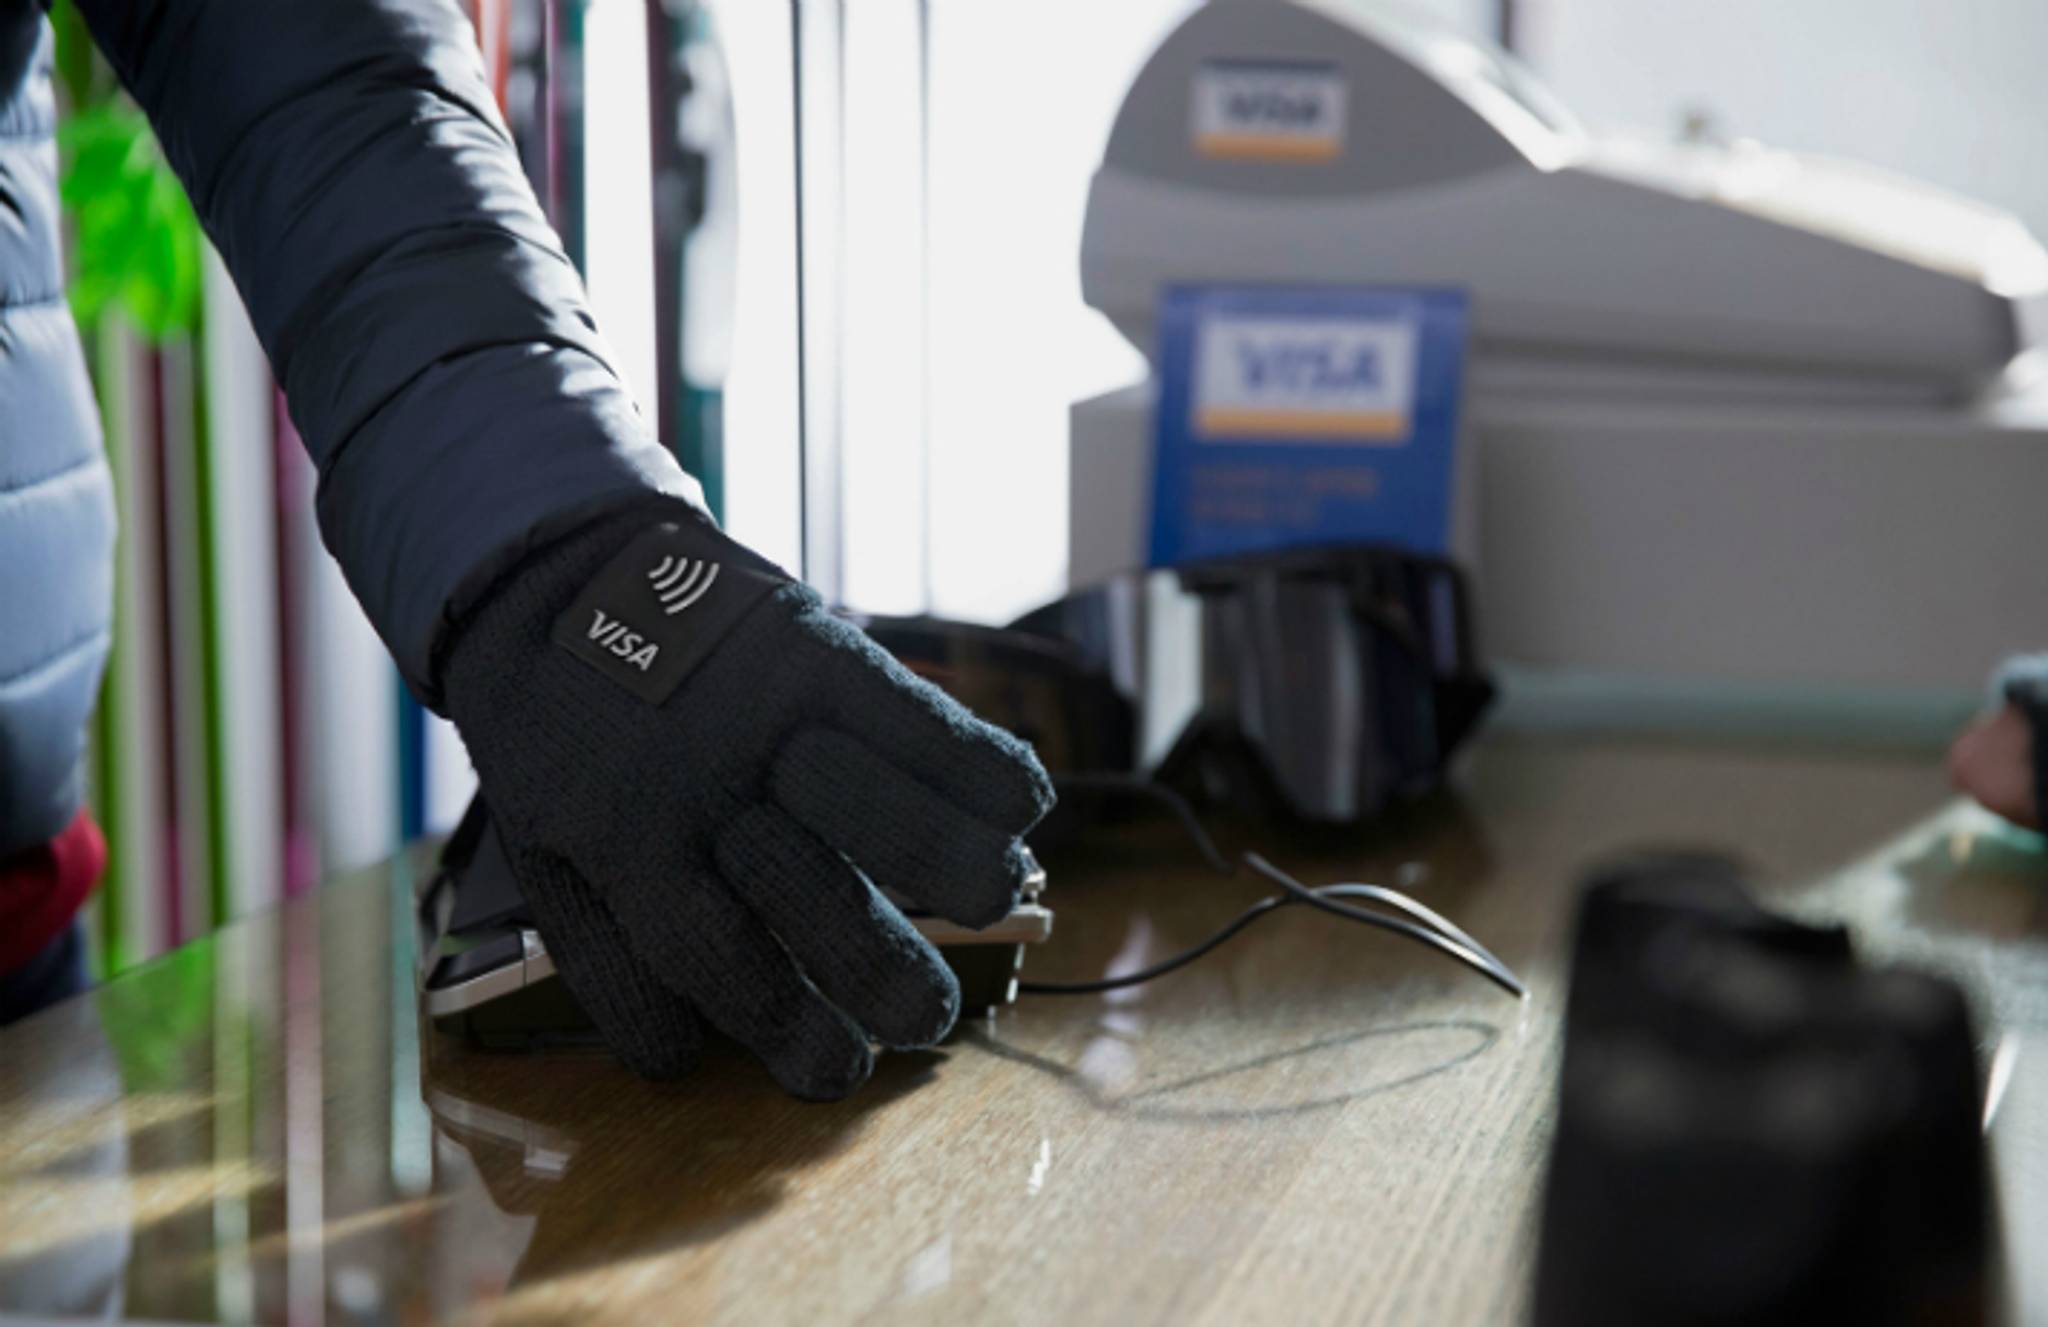 Visa will sell contactless pay gloves at the Olympics